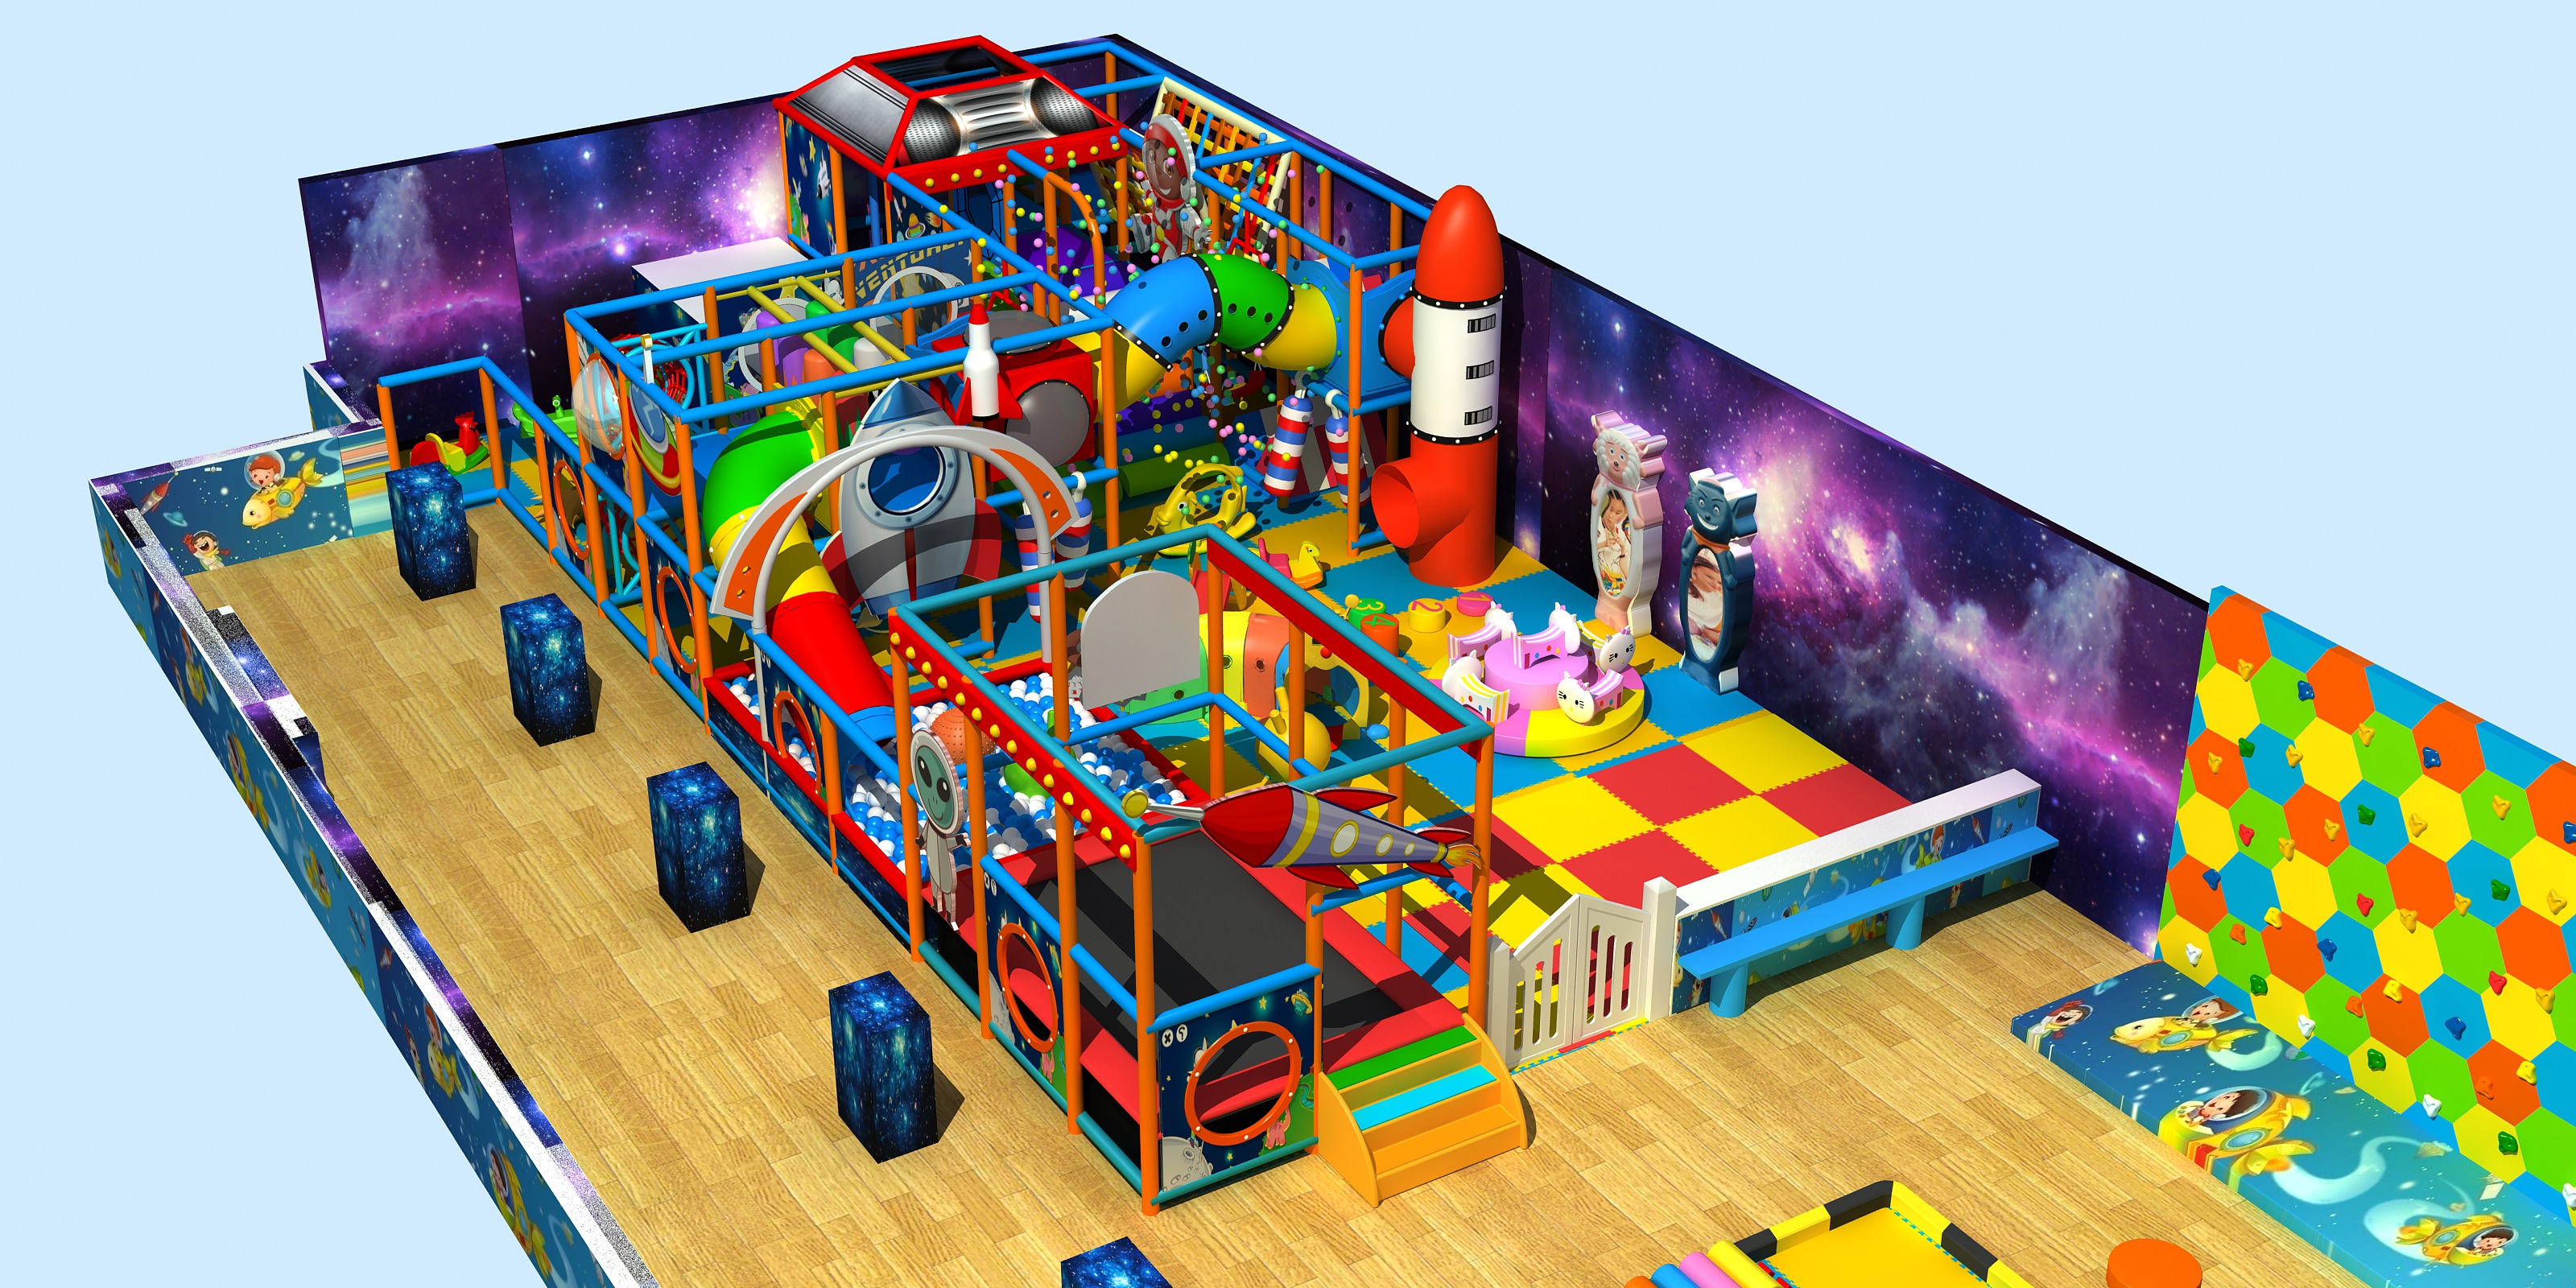 Customer's indoor playground equipment project from India